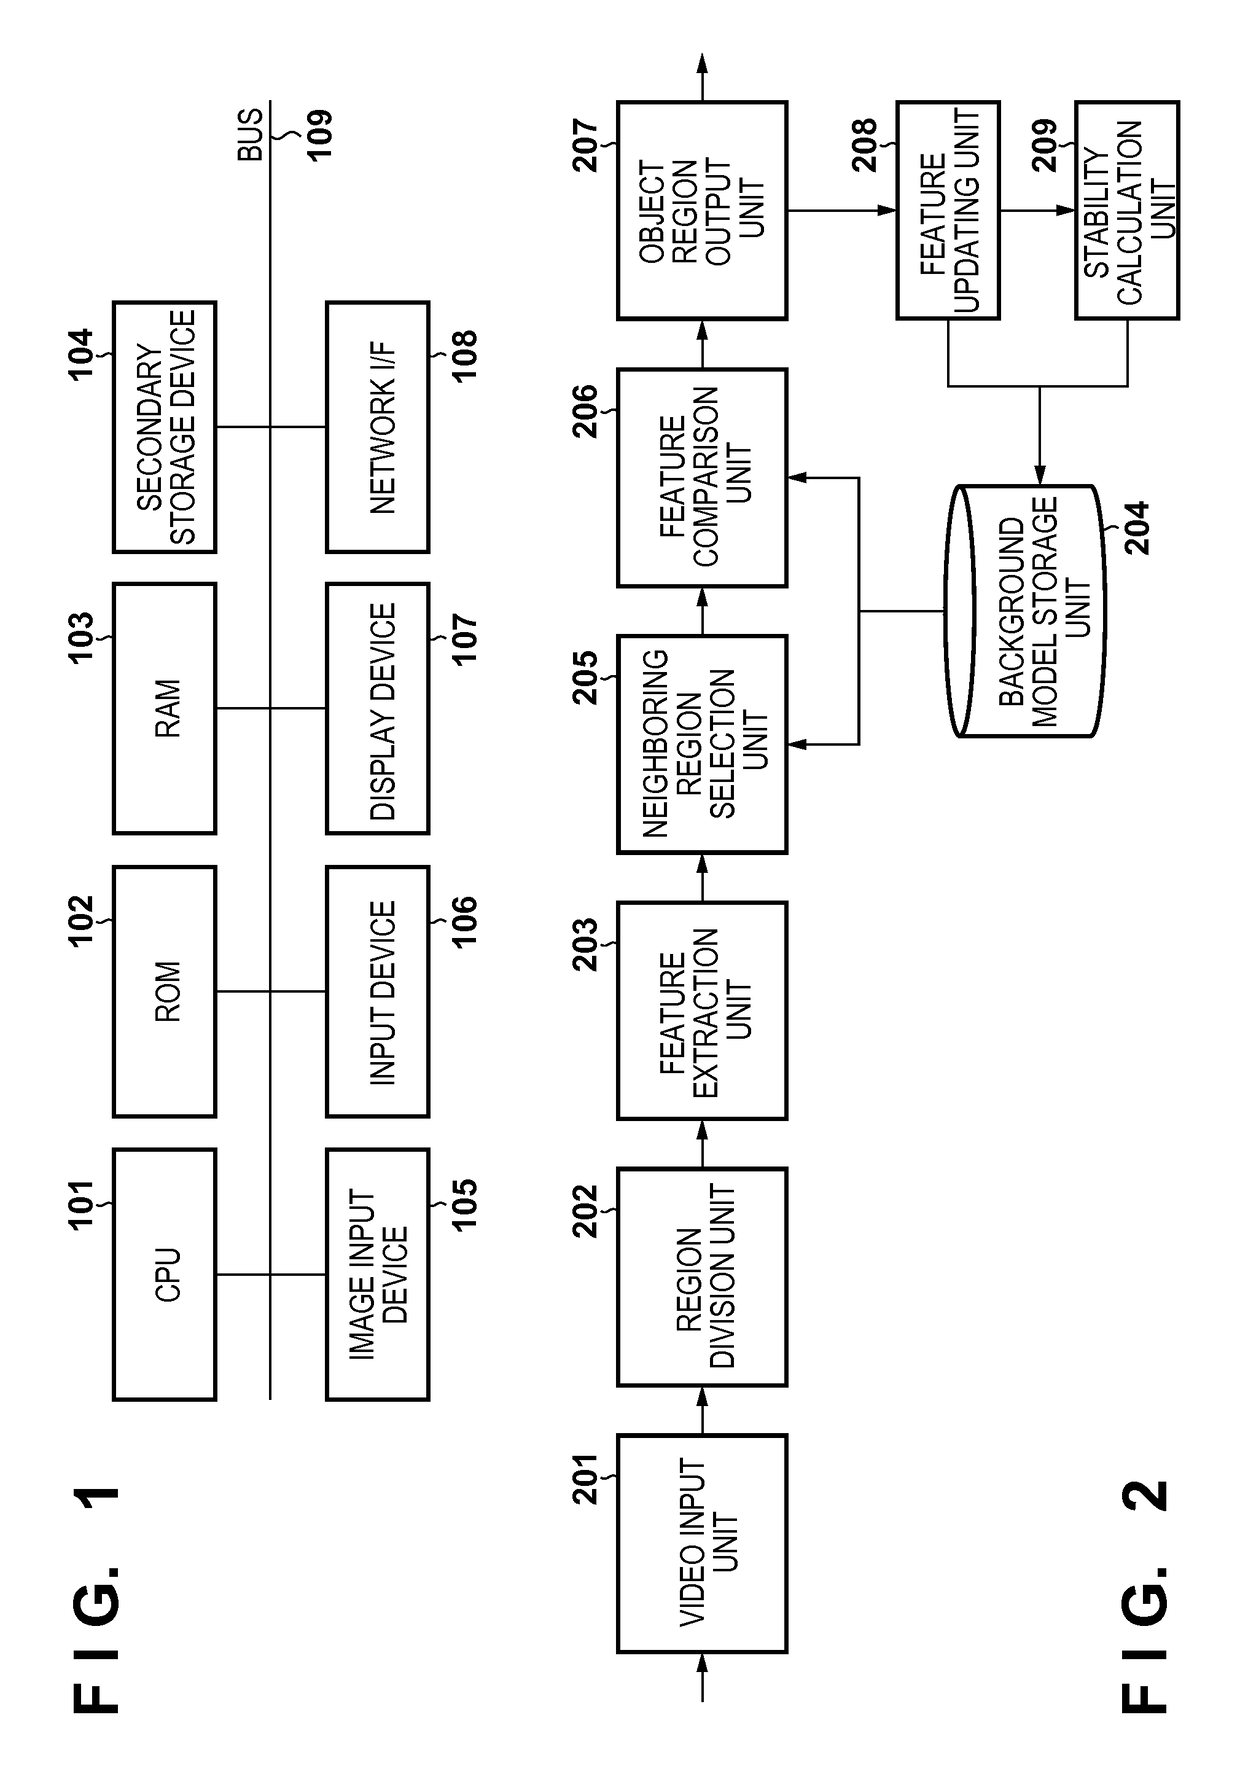 Image processing apparatus and image processing method for finding background regions in an image